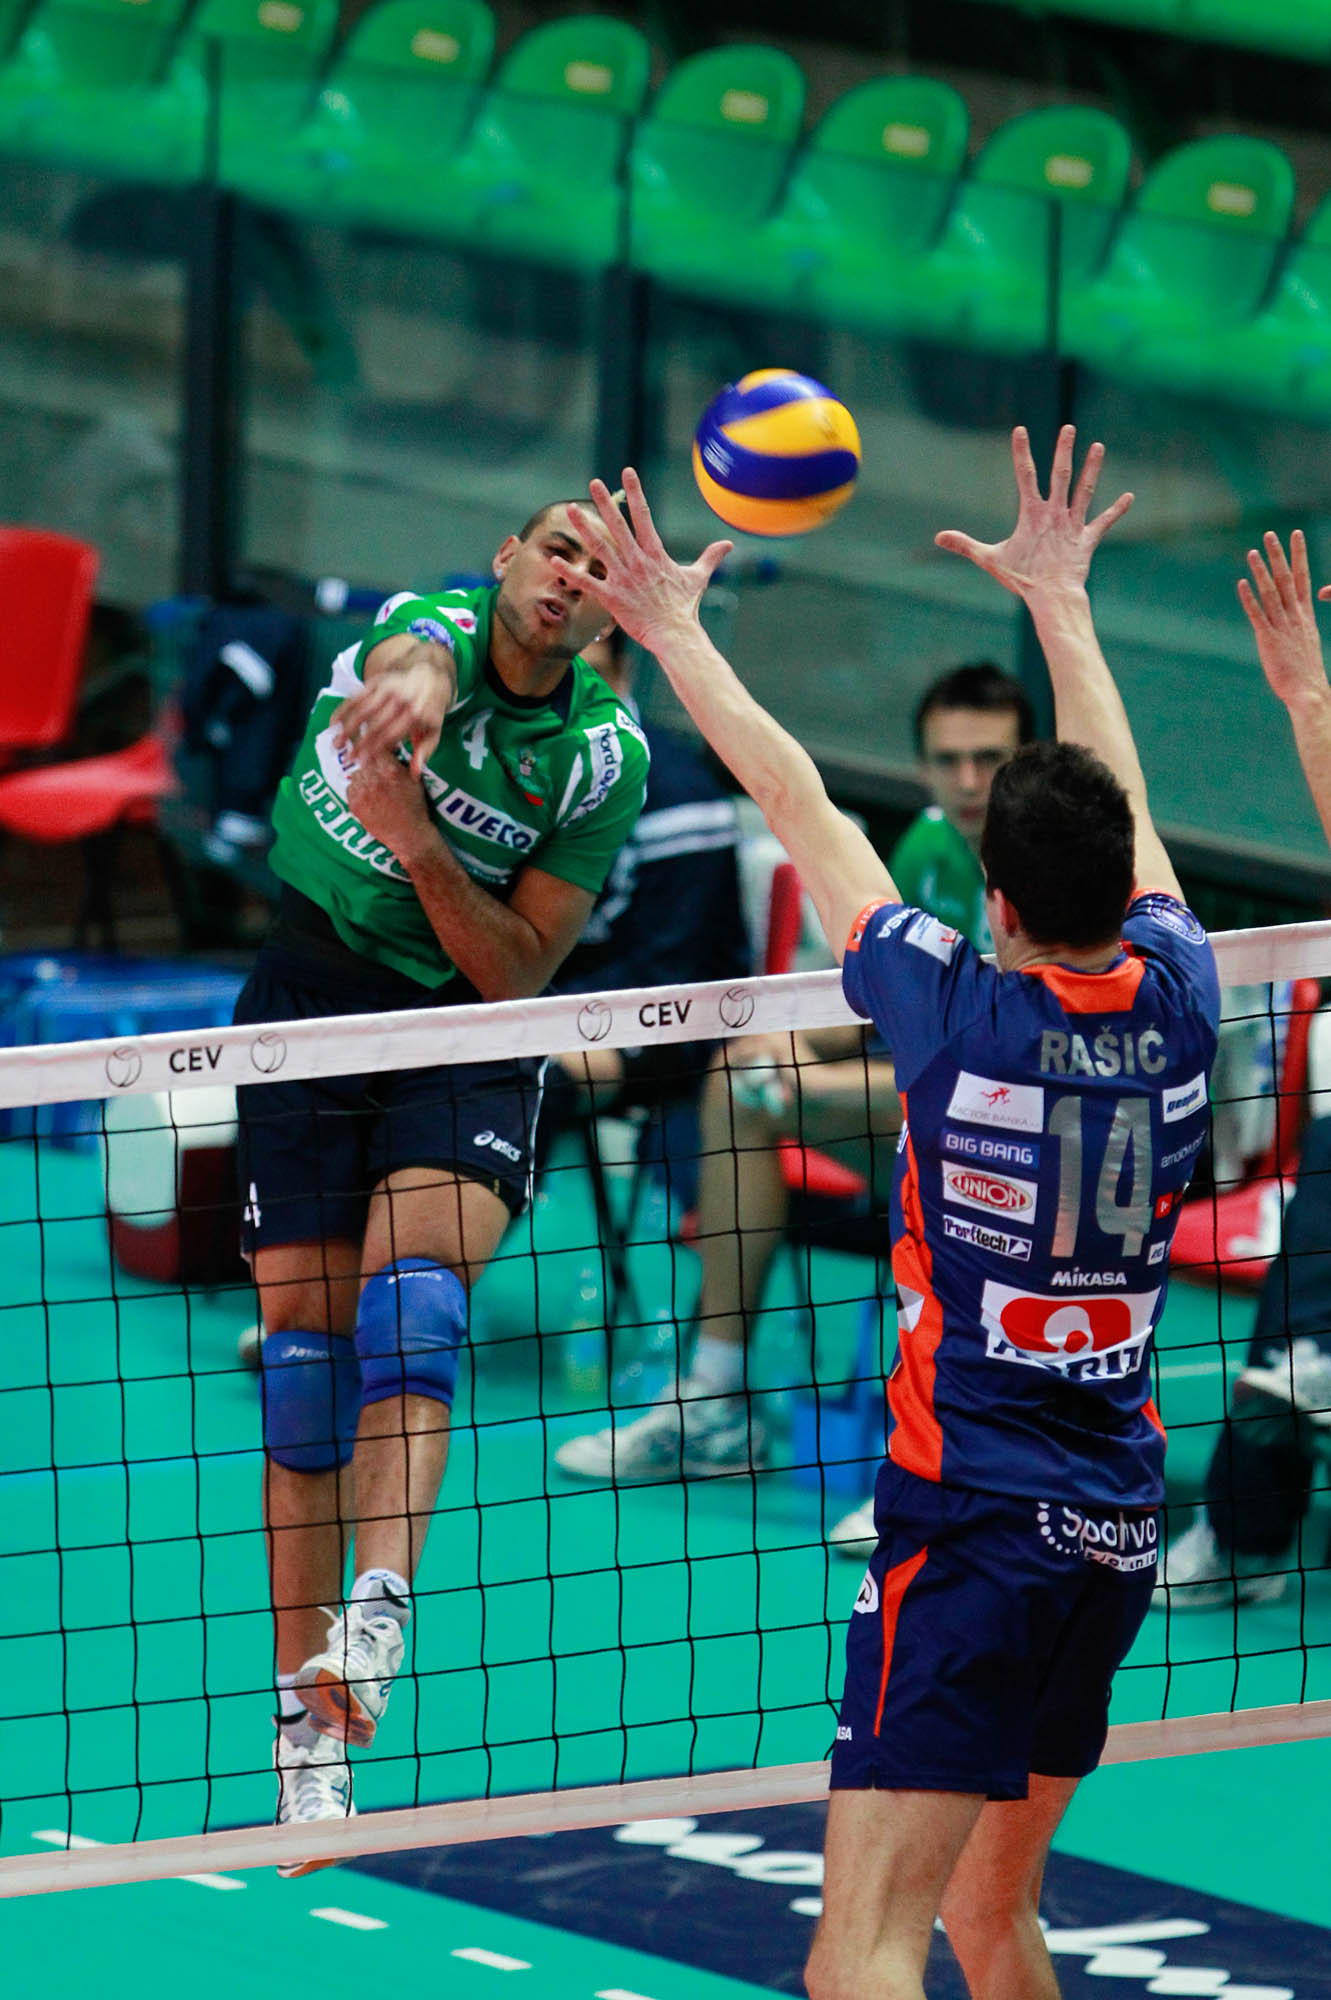 Champions_Cuneo_Volley